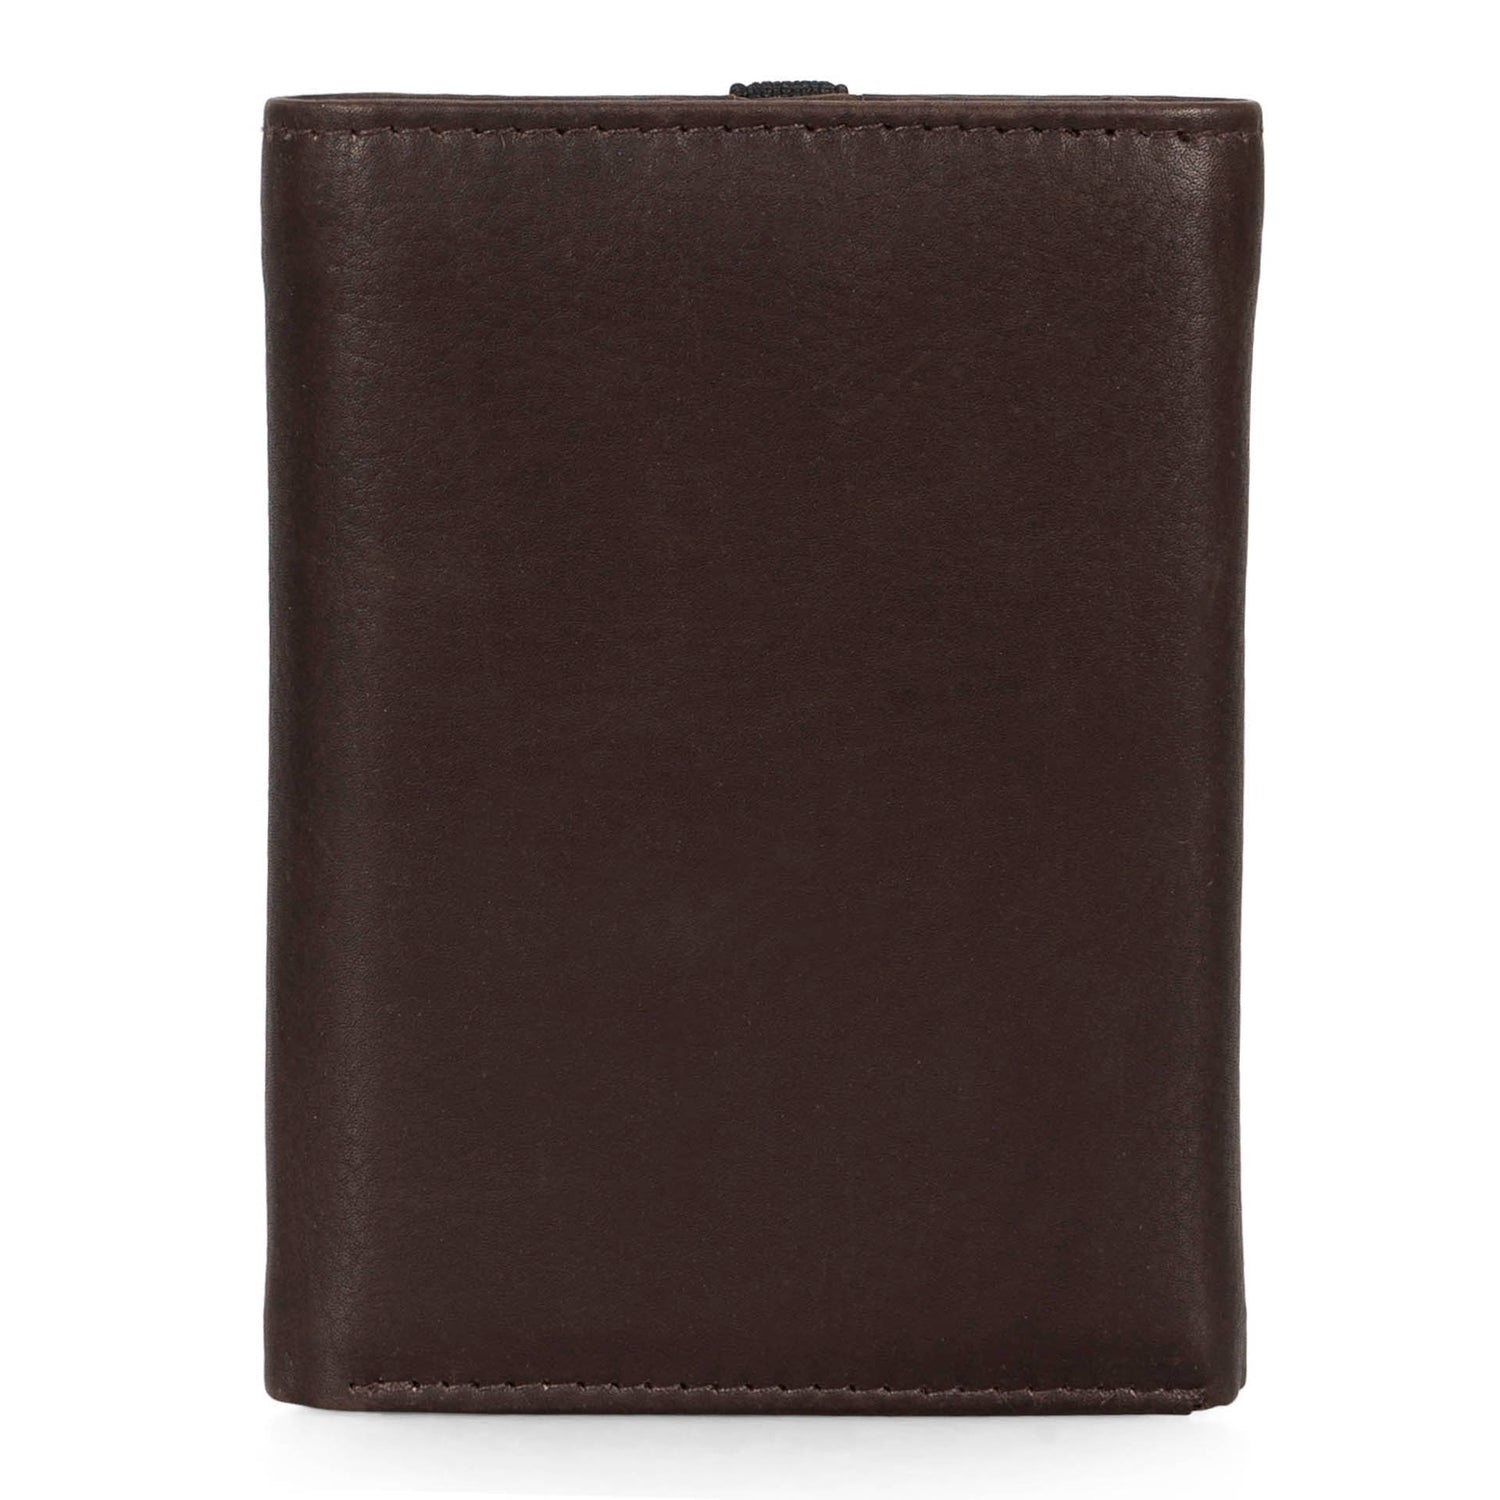 Back view of a brown wallet called Hudson designed by Tracker on a white background, showcasing its smooth leather.